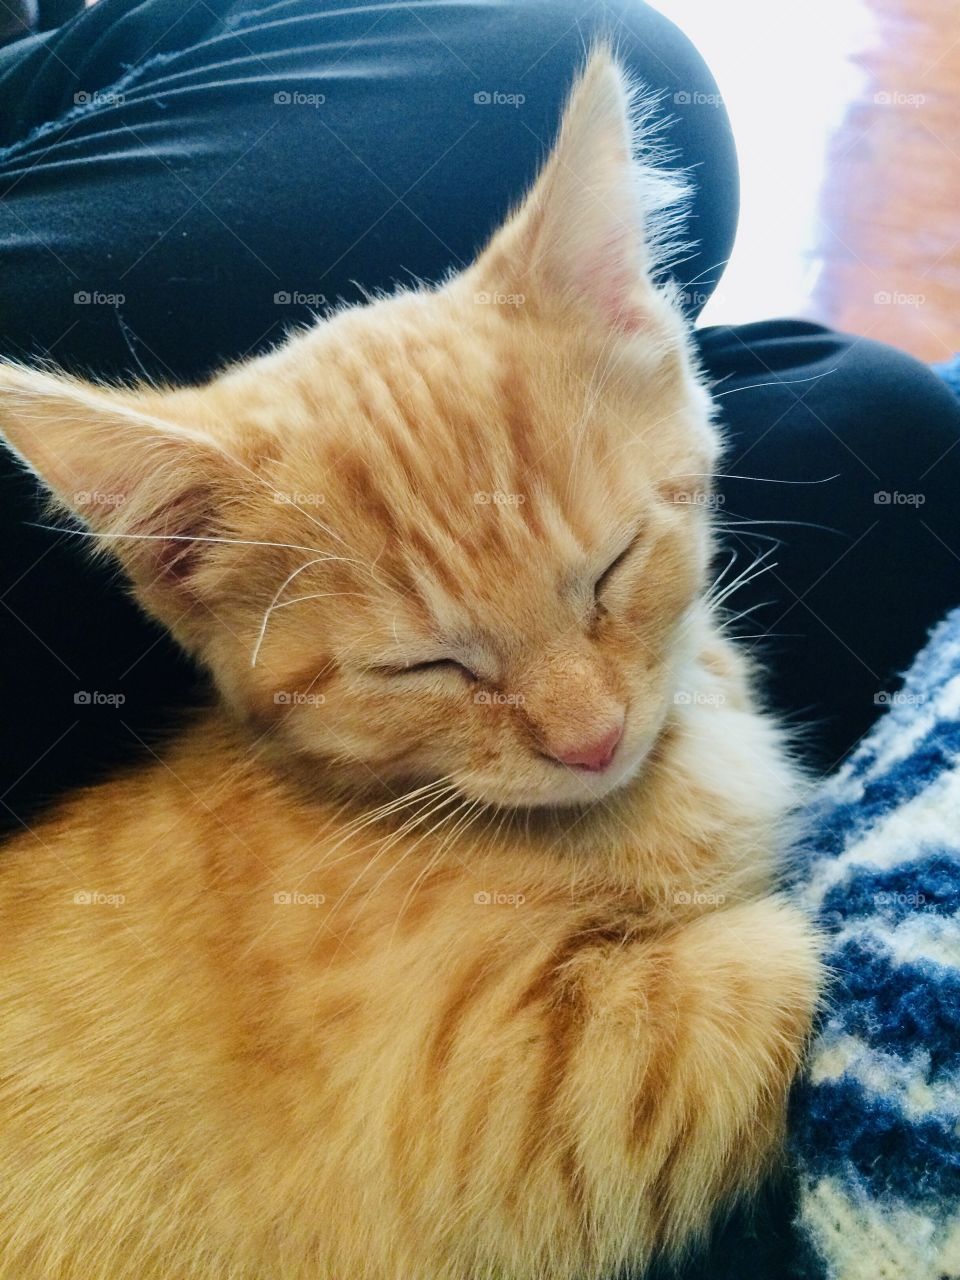 Adorable little orange tabby kitten all cuddled up in white and blue blanket with eyes closed. 